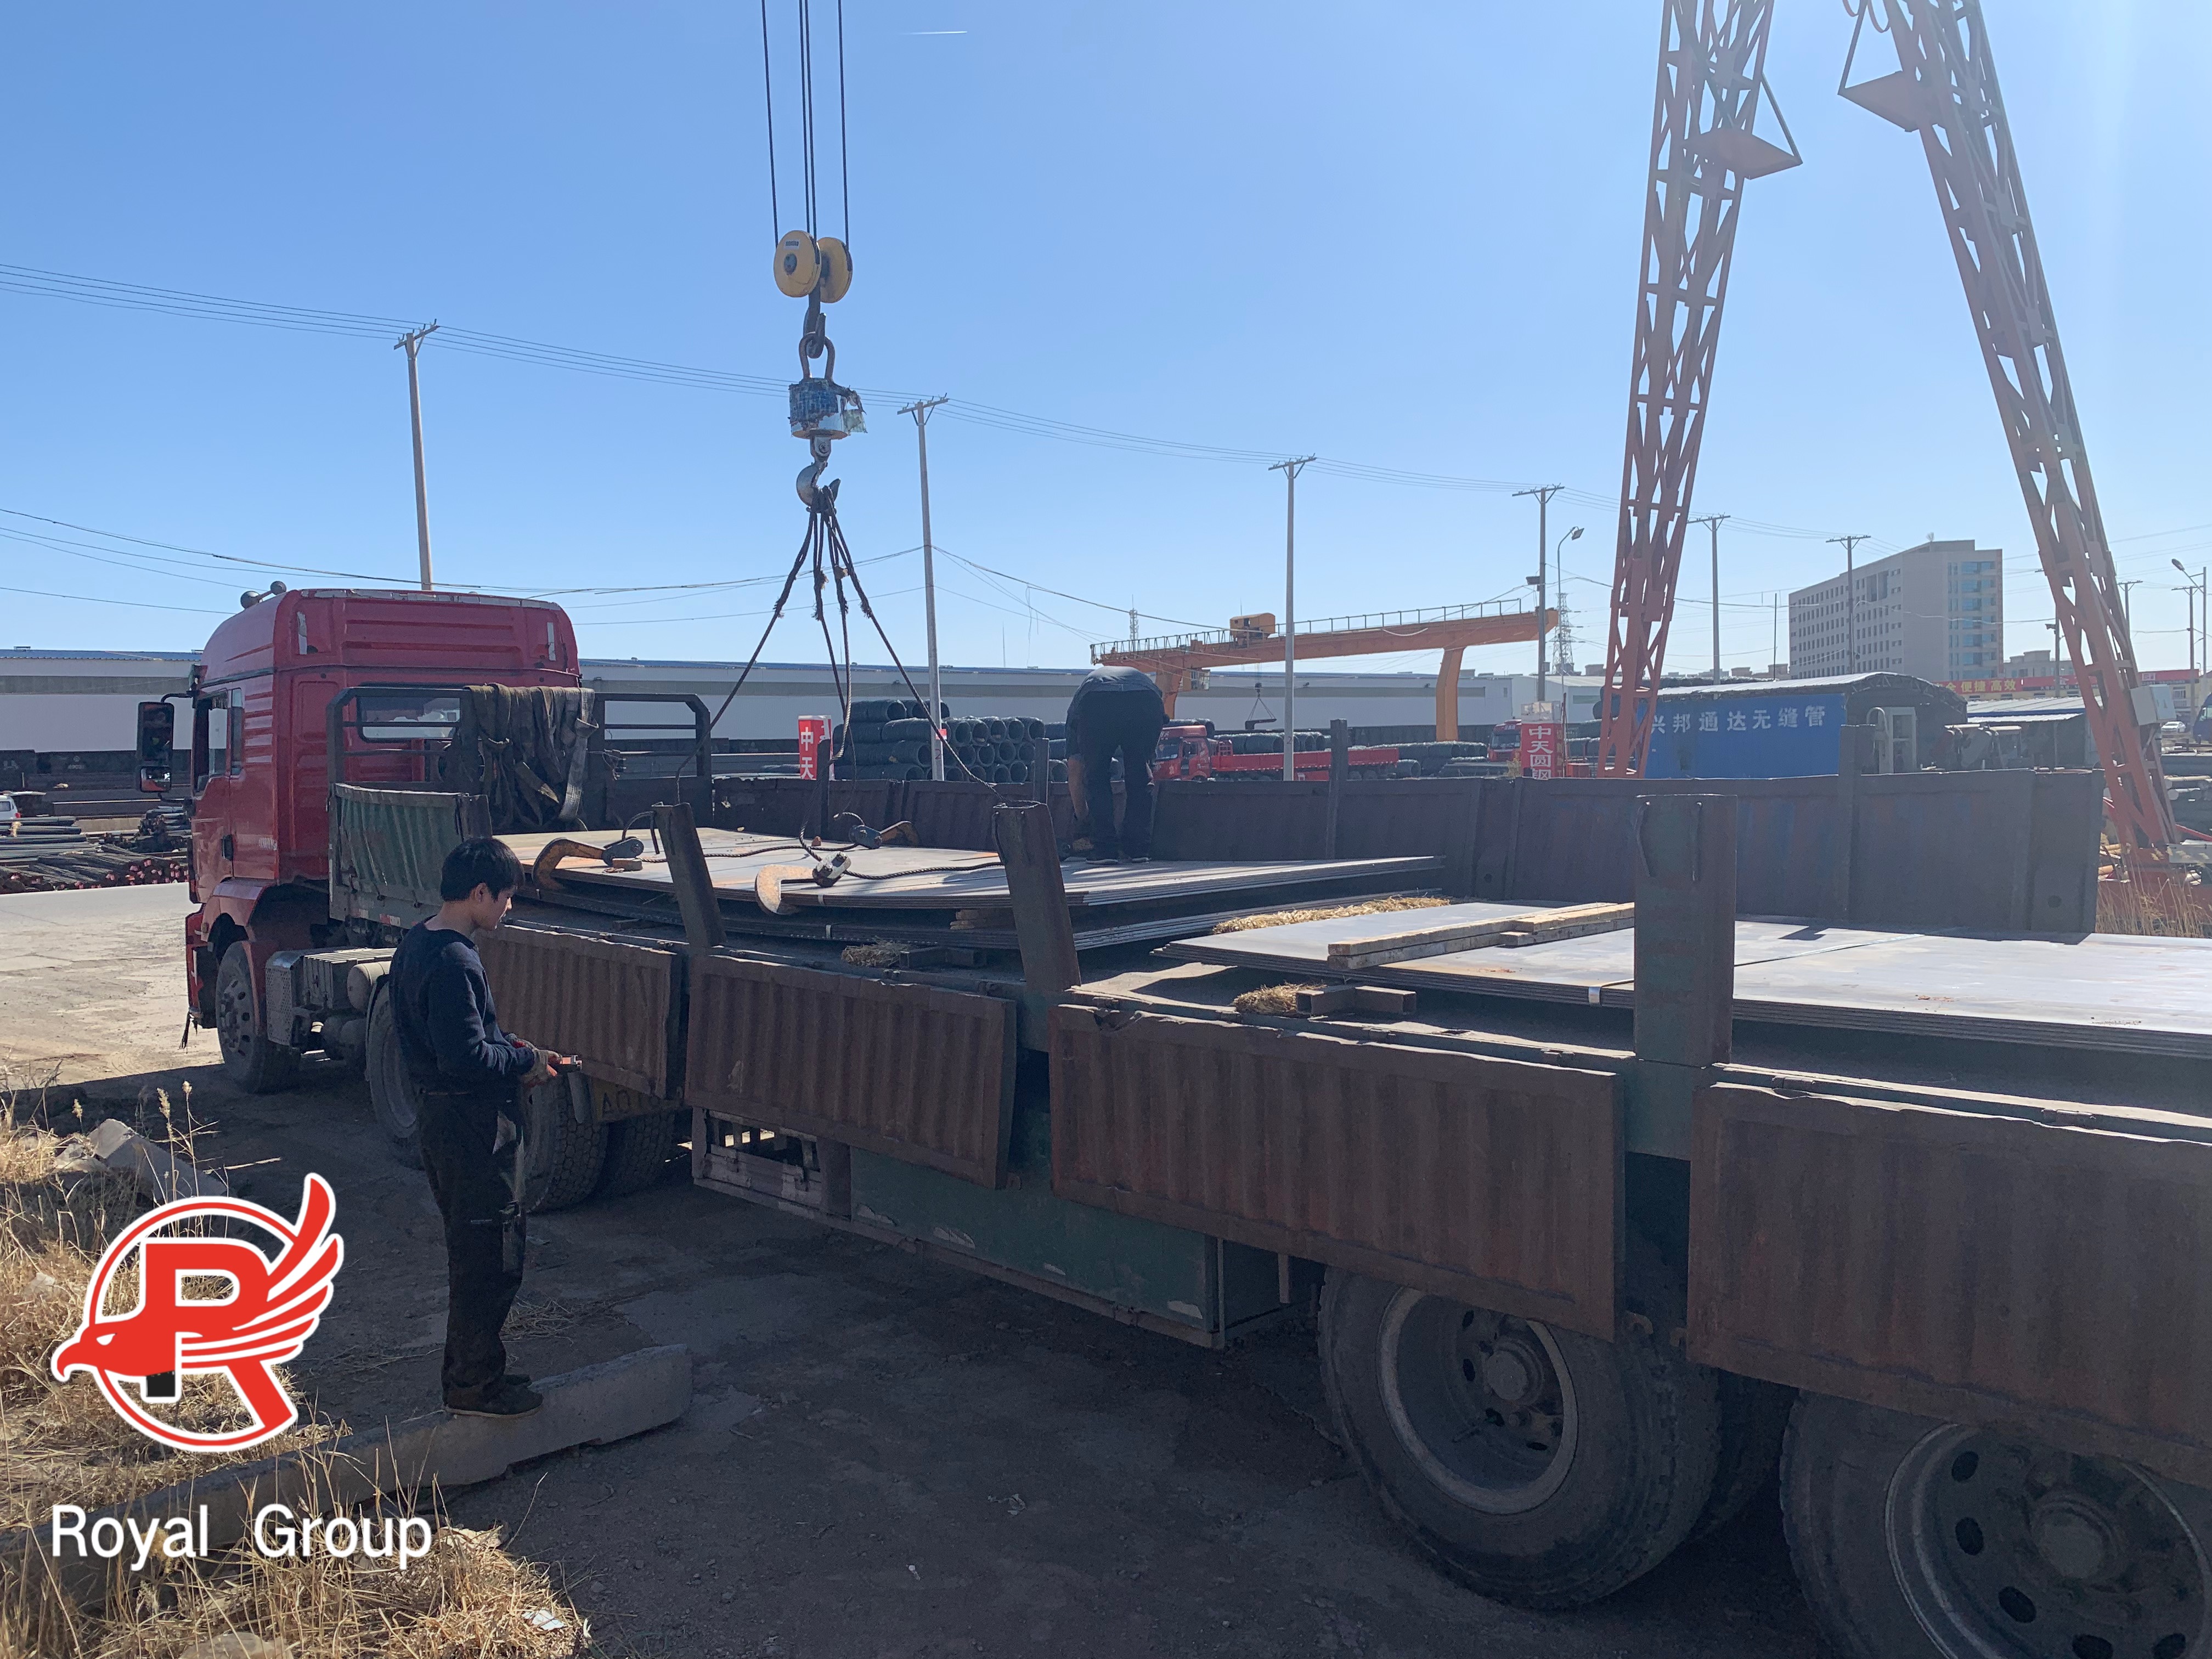 Hot-rolled steel plates were sent to Bolivia (1)